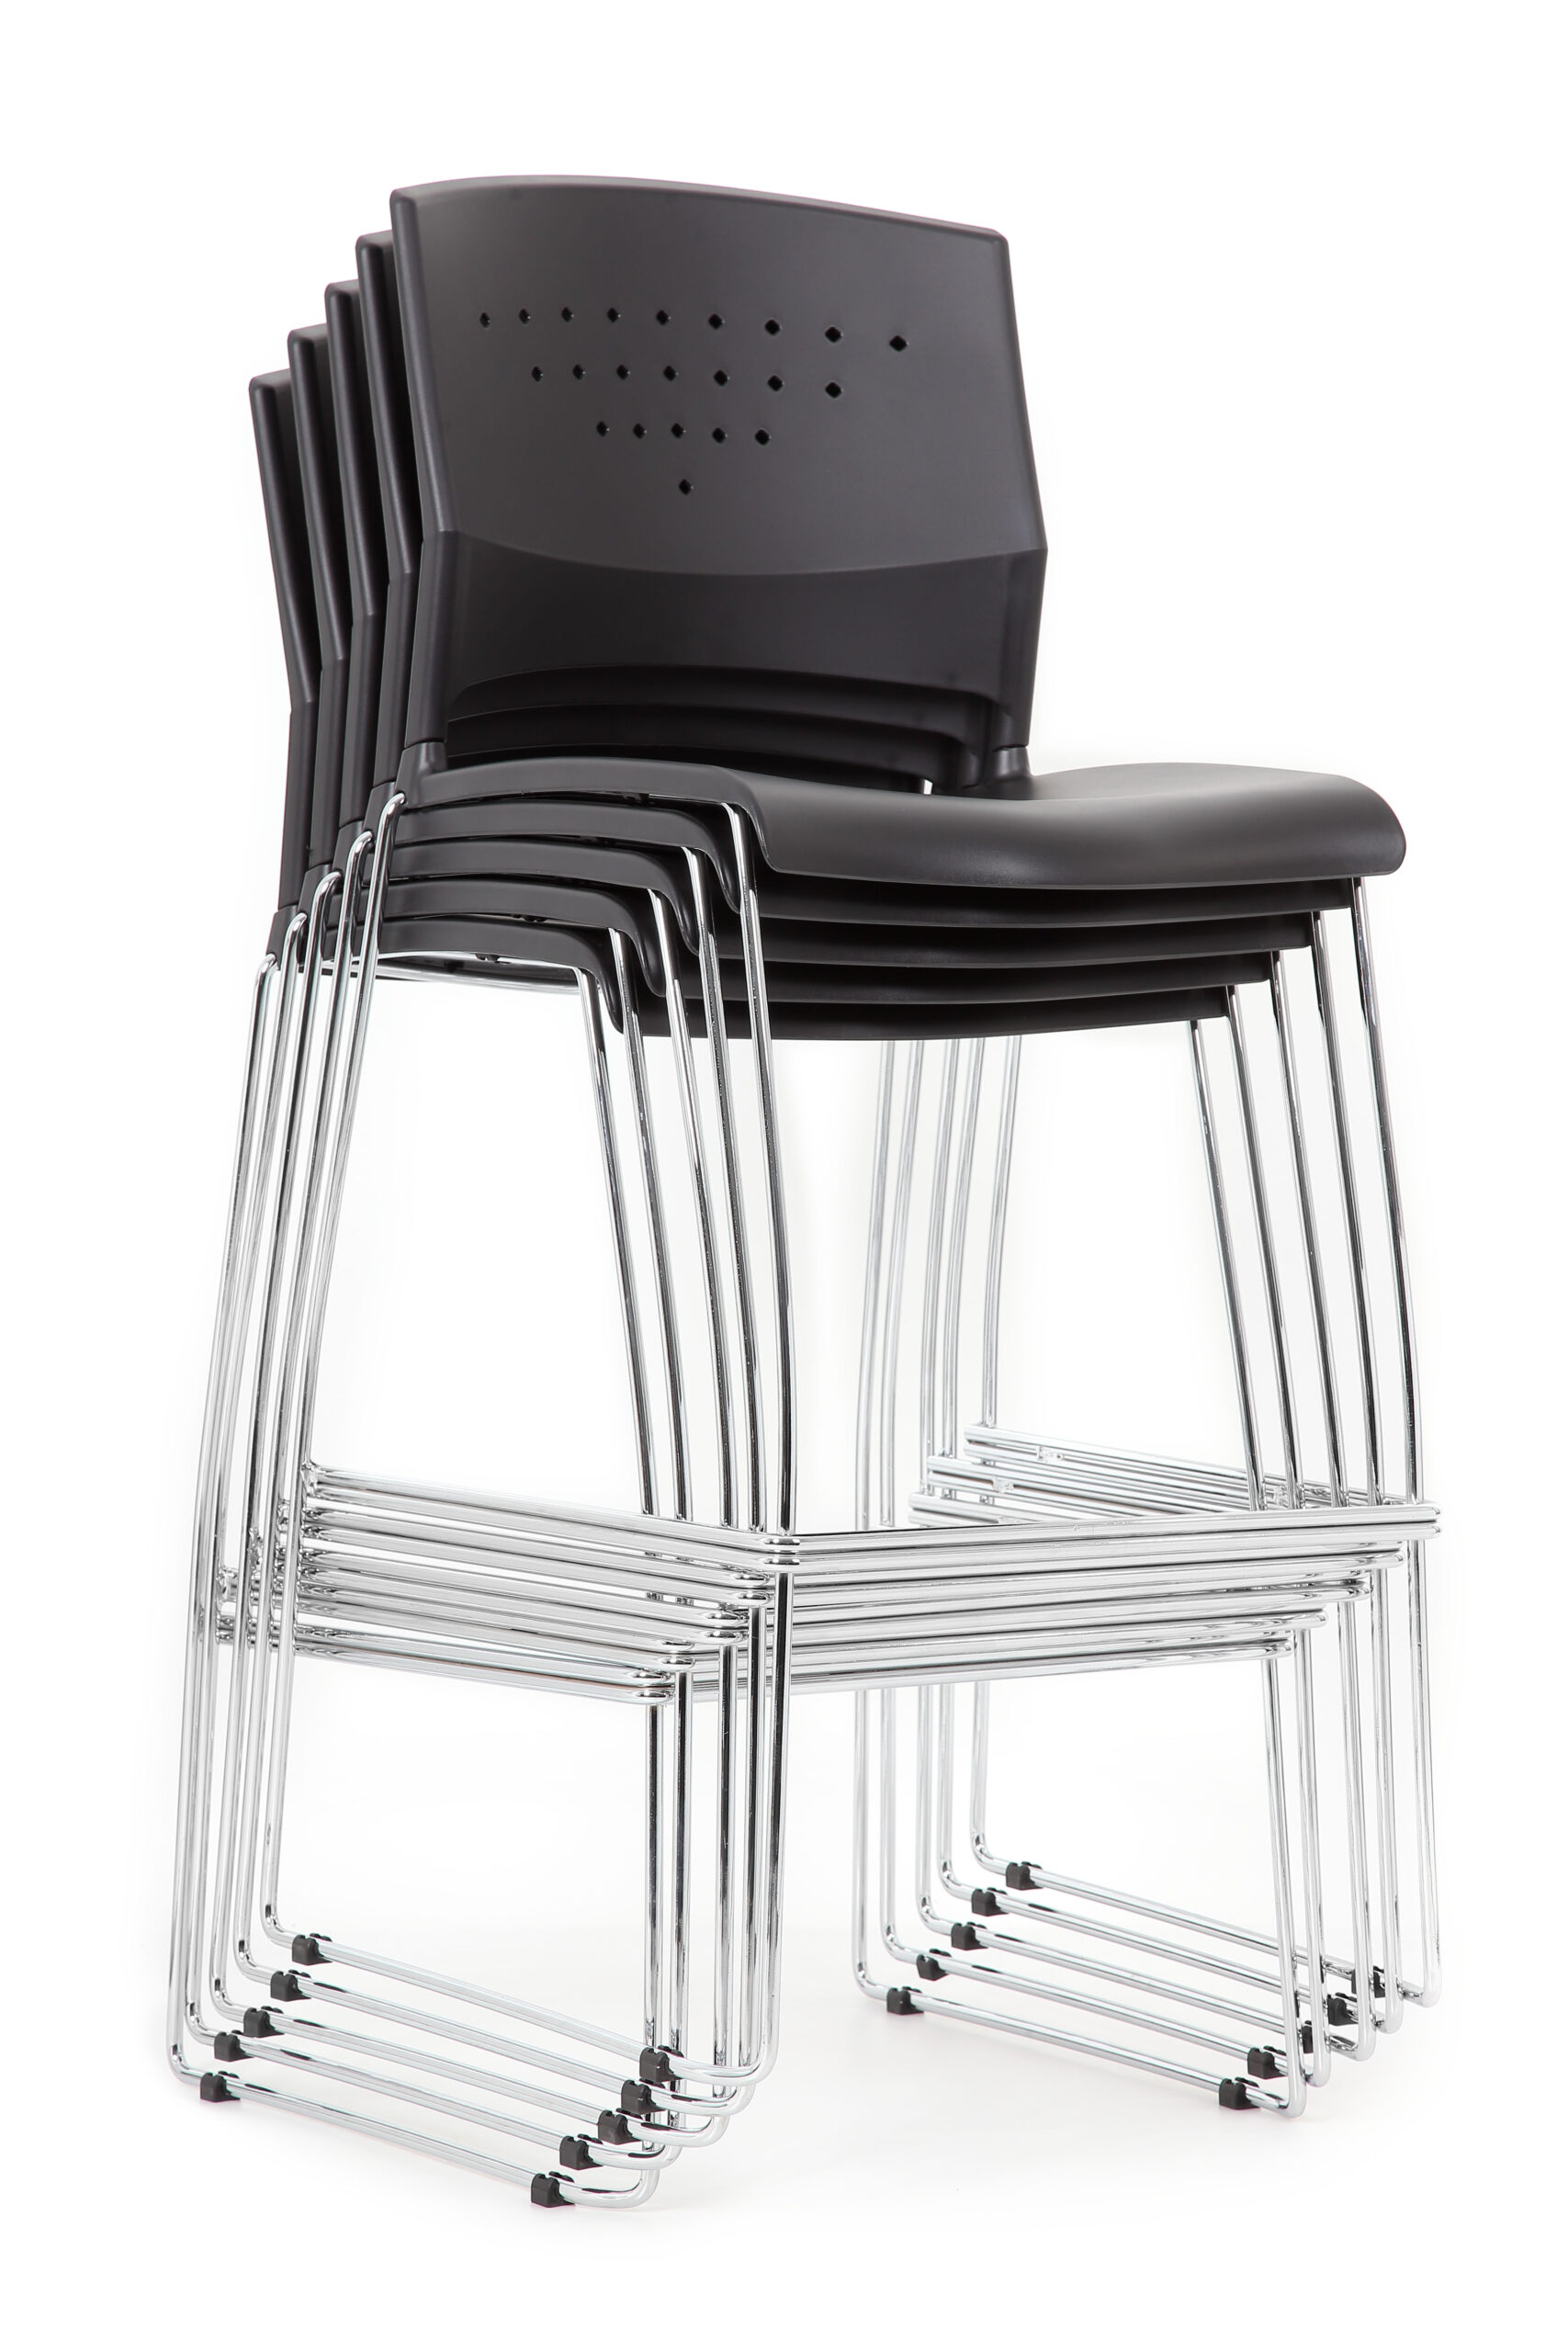 Boss Black Stack Stool With Chrome Frame (set of 2) – BossChair